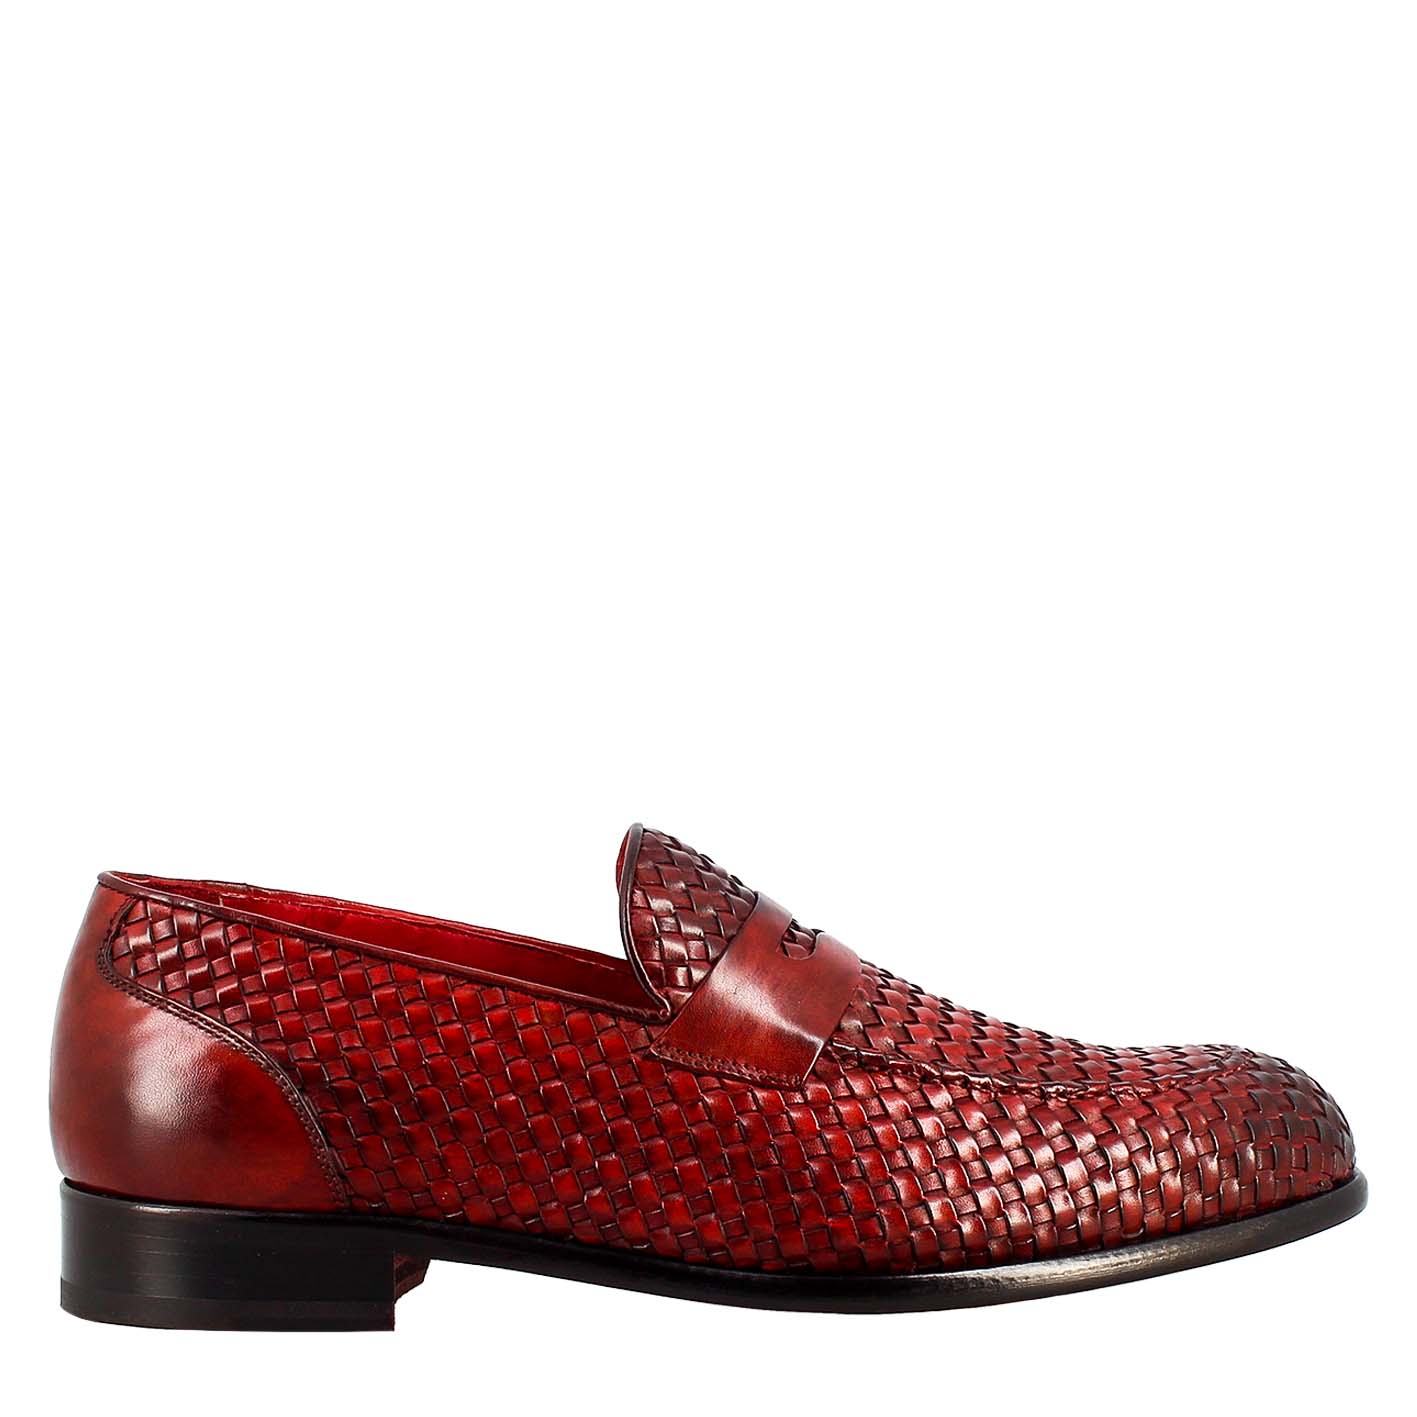 Il Rosso Men's Red Bottom Sole Oxford Shoes